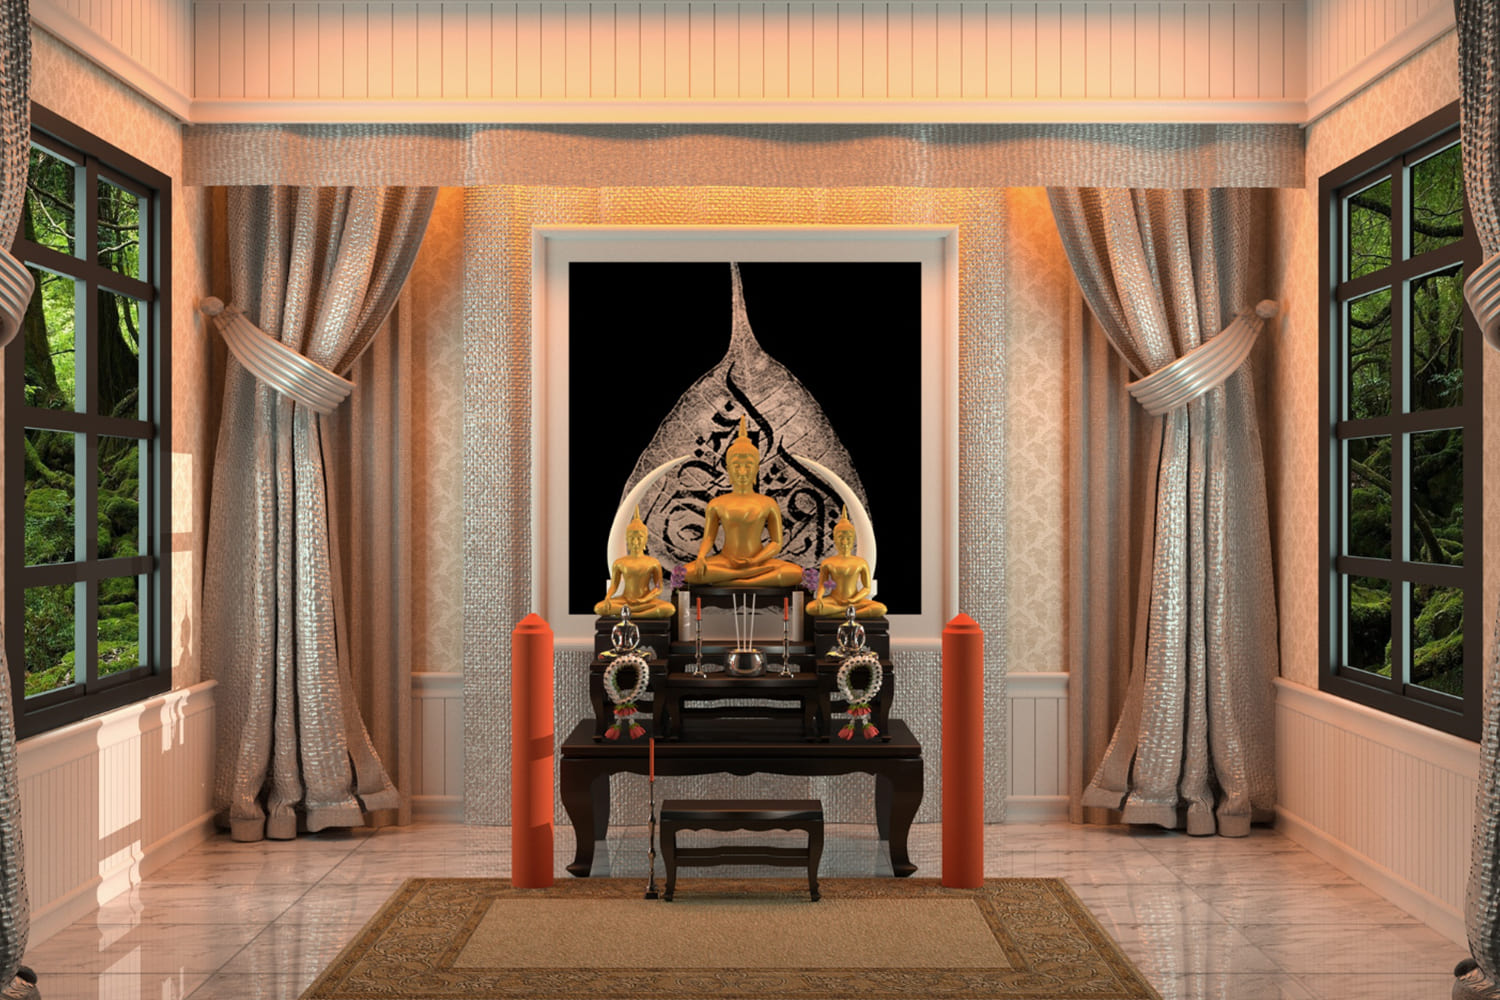 An extremely sentimental pooja room interior design for Buddha dedicated by the hearts of the residents.